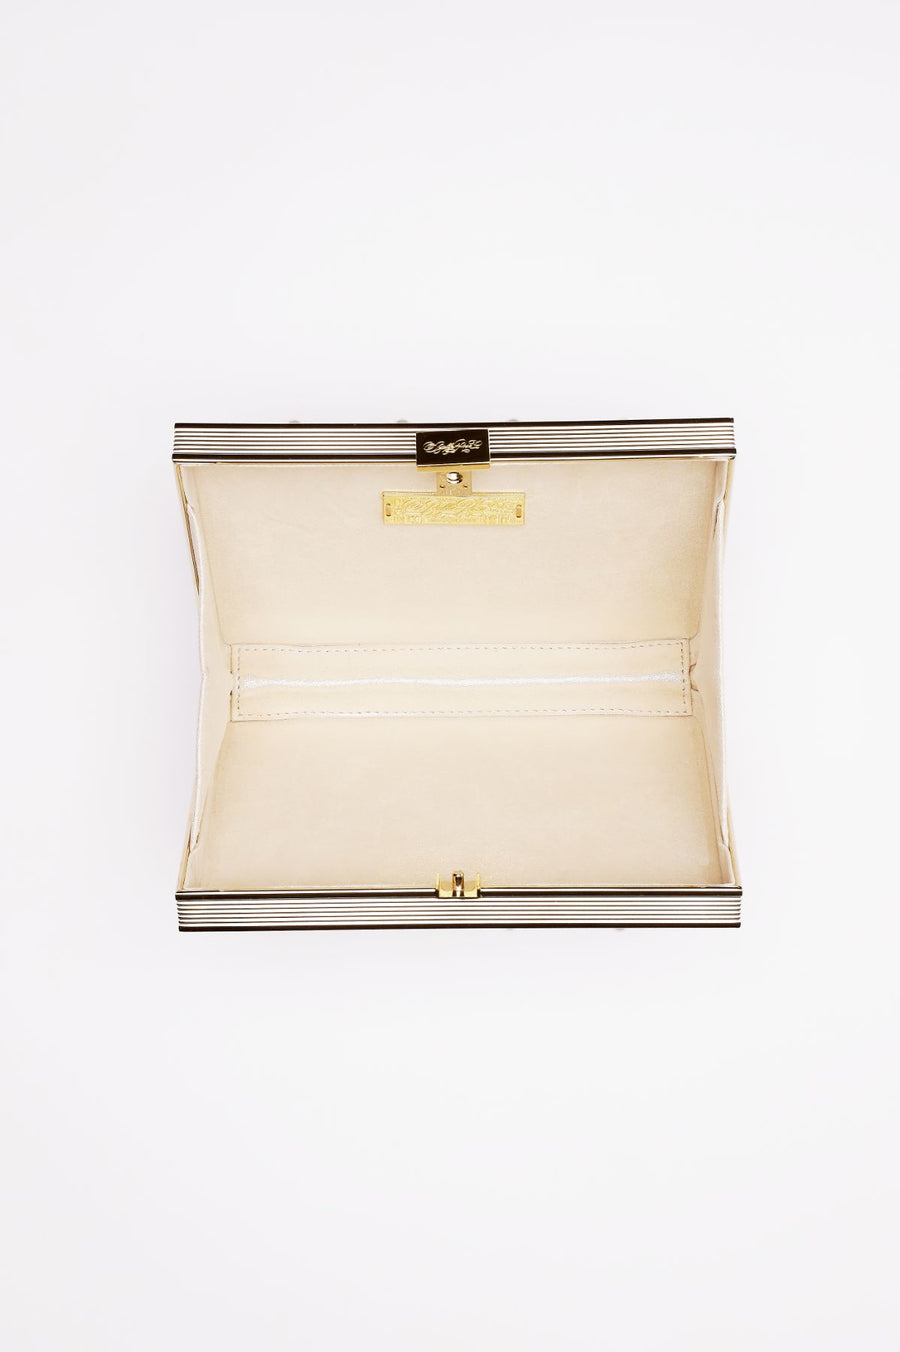 A beige and gold Venezia Bridal Pearl with Crystals Clutch x MICAELA on a white surface from The Bella Rosa Collection.